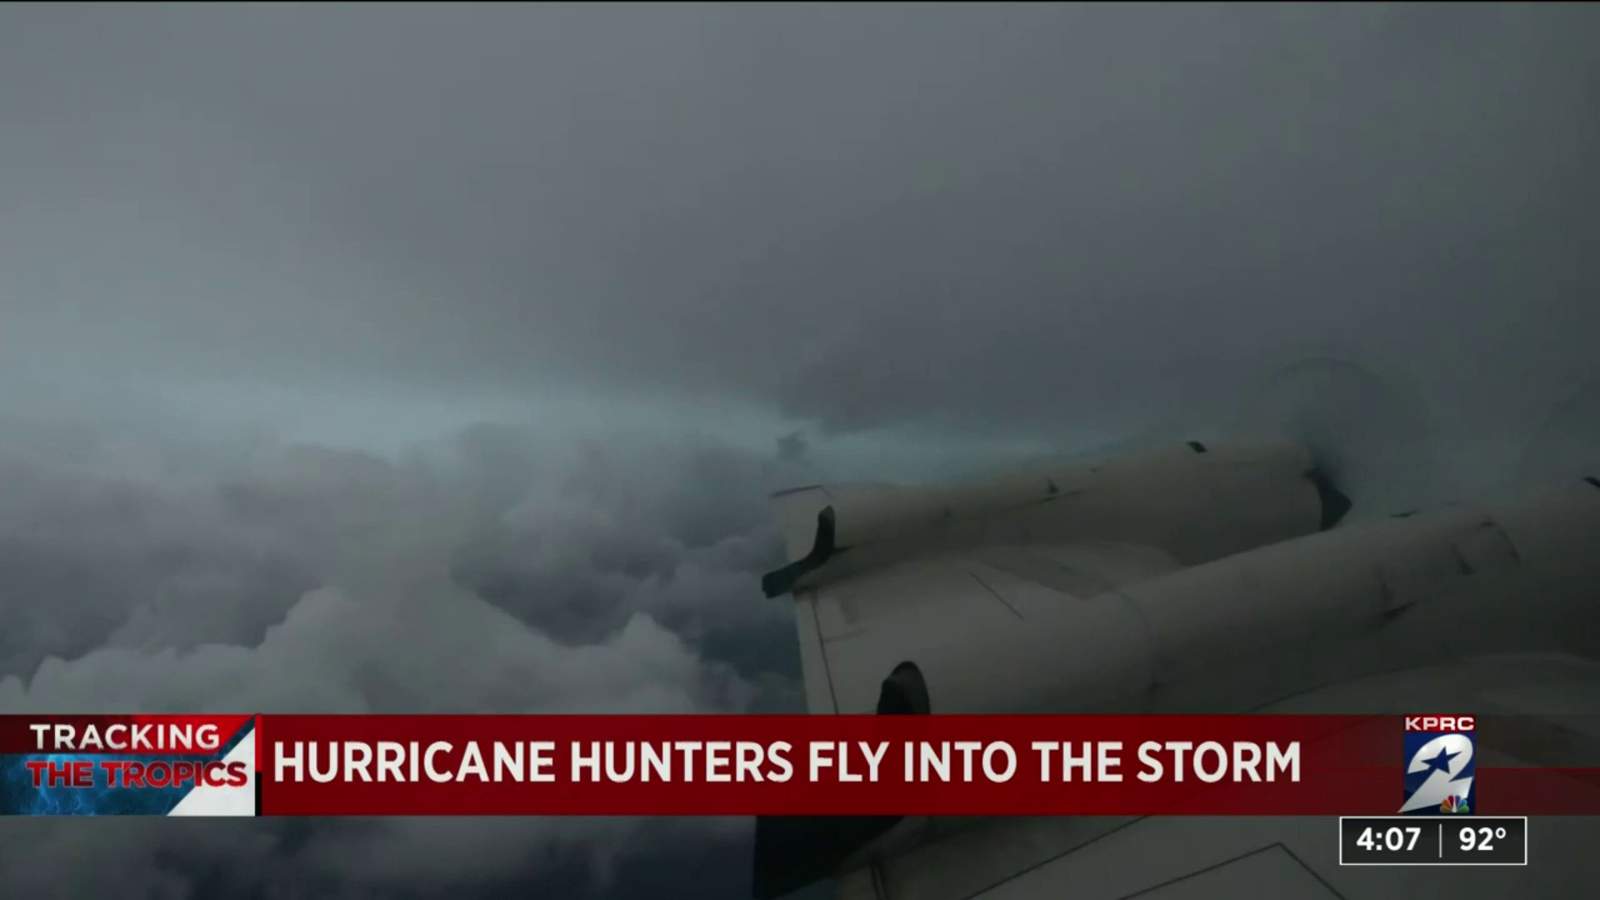 WATCH: KPRC 2 meteorologist Justin Stapleton speaks with hurricane hunter set to fly into Tropical Storm Laura